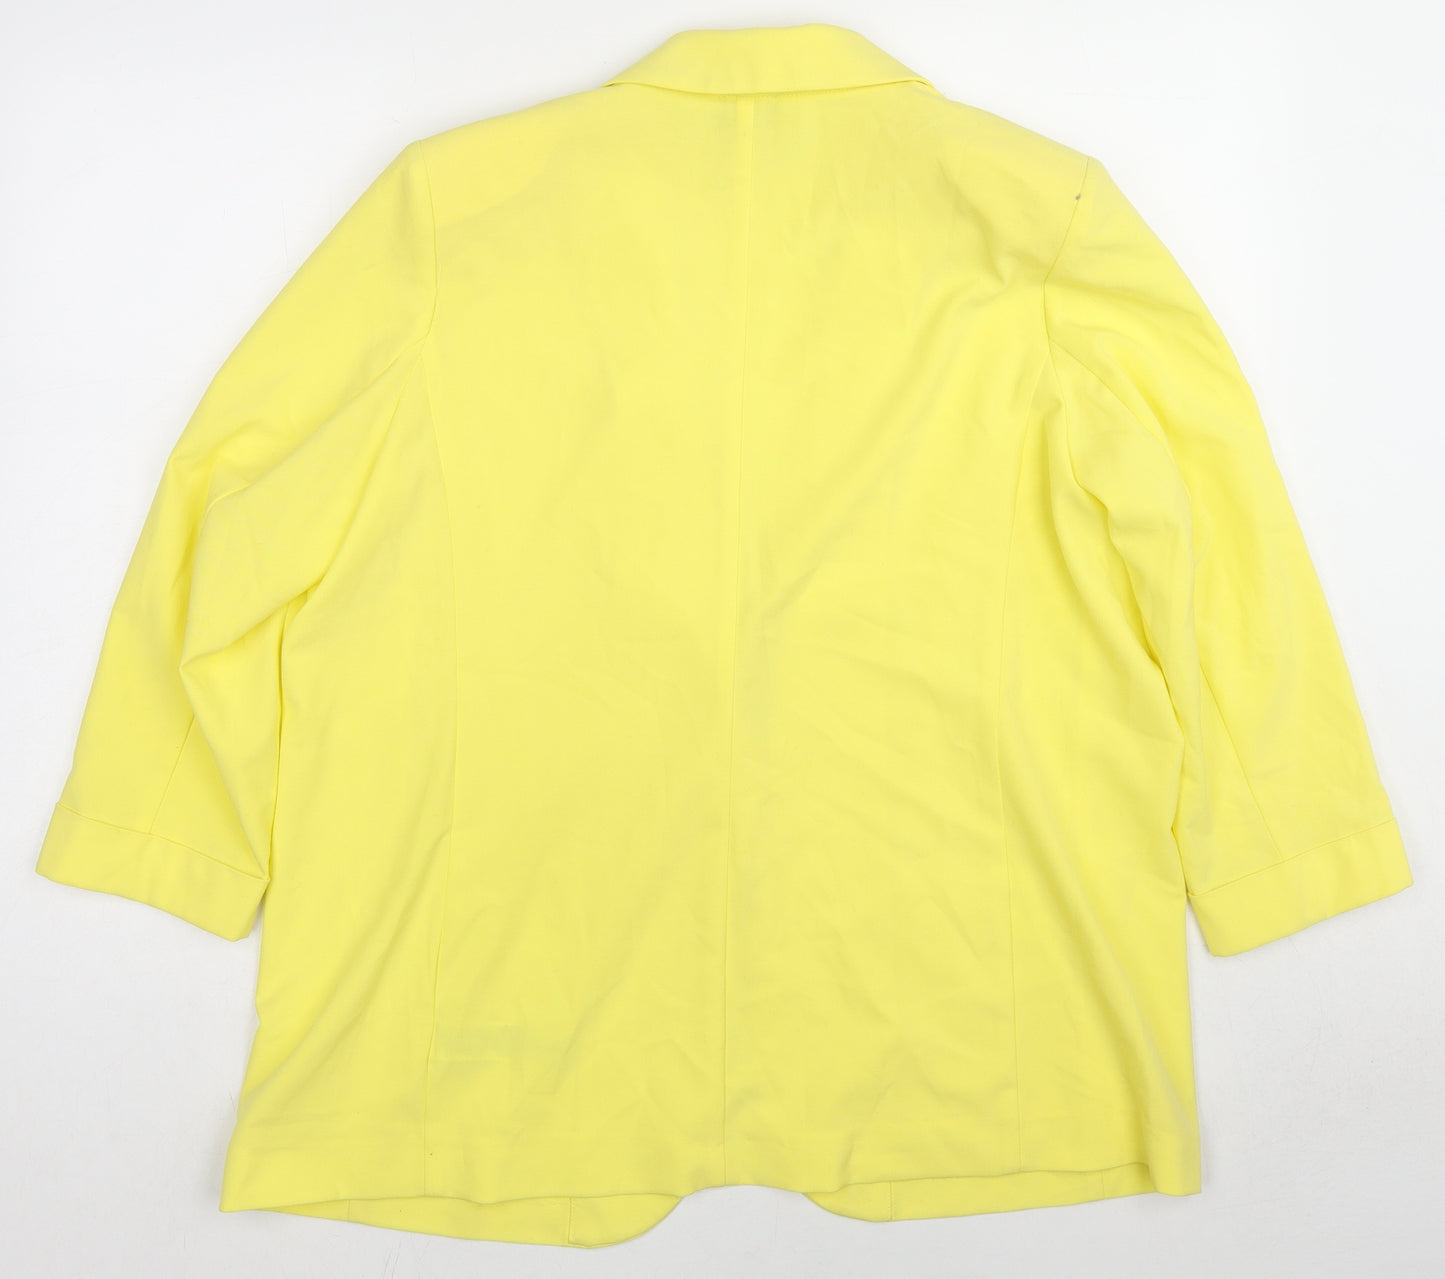 Marks and Spencer Womens Yellow Jacket Blazer Size 18